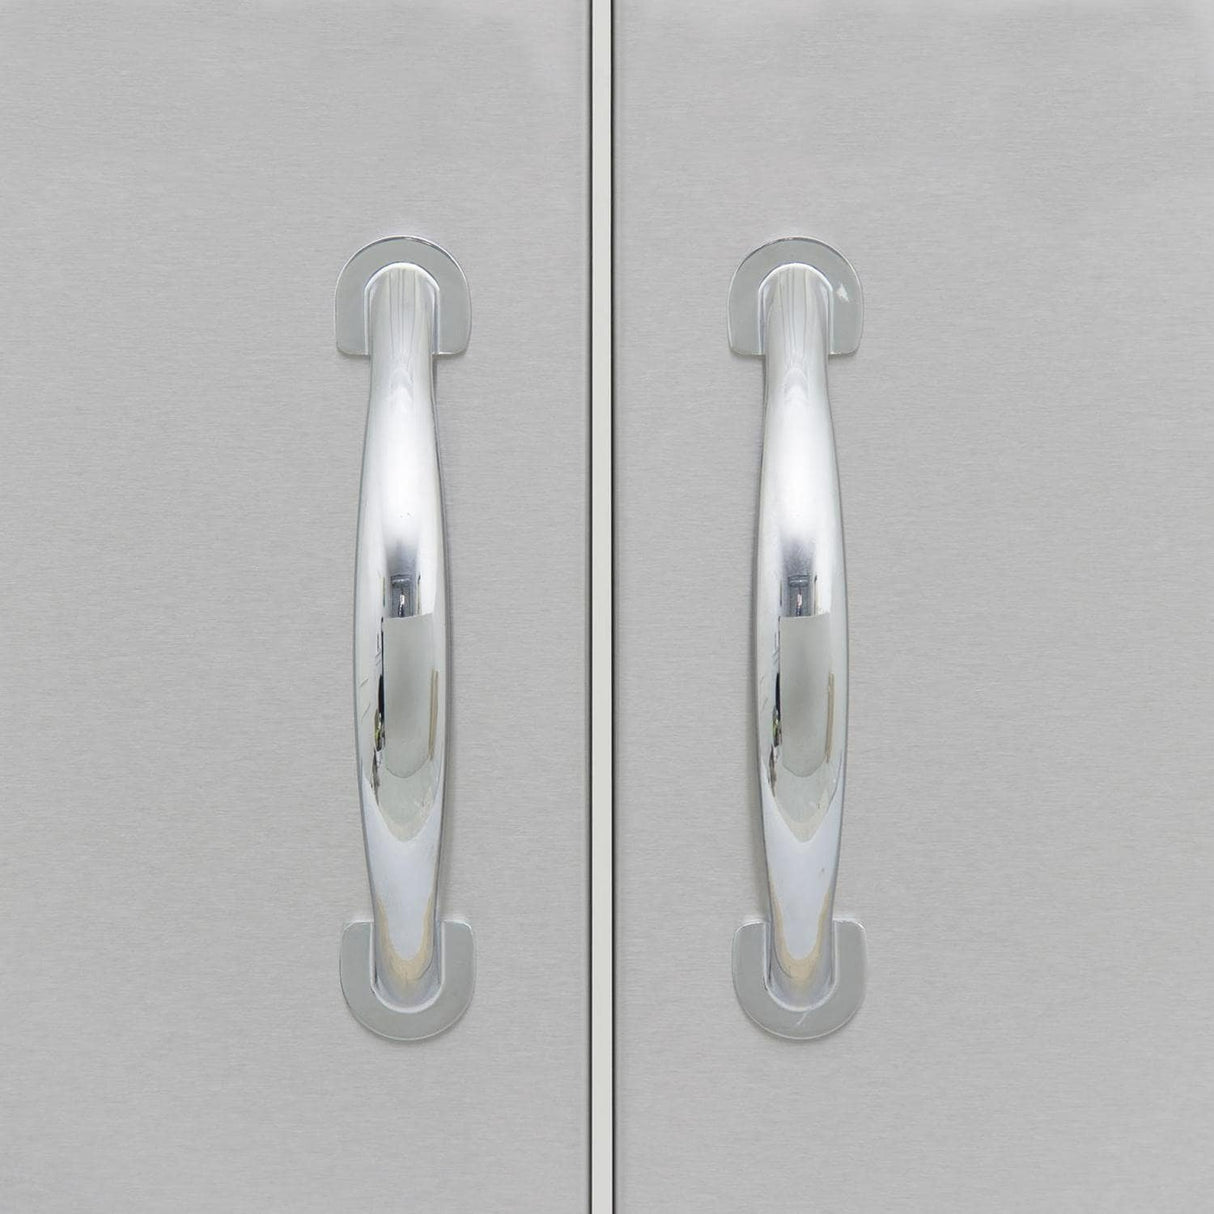 Blaze 32-Inch Stainless Steel Double Access Door With Paper Towel Holder - BLZ-AD32-R